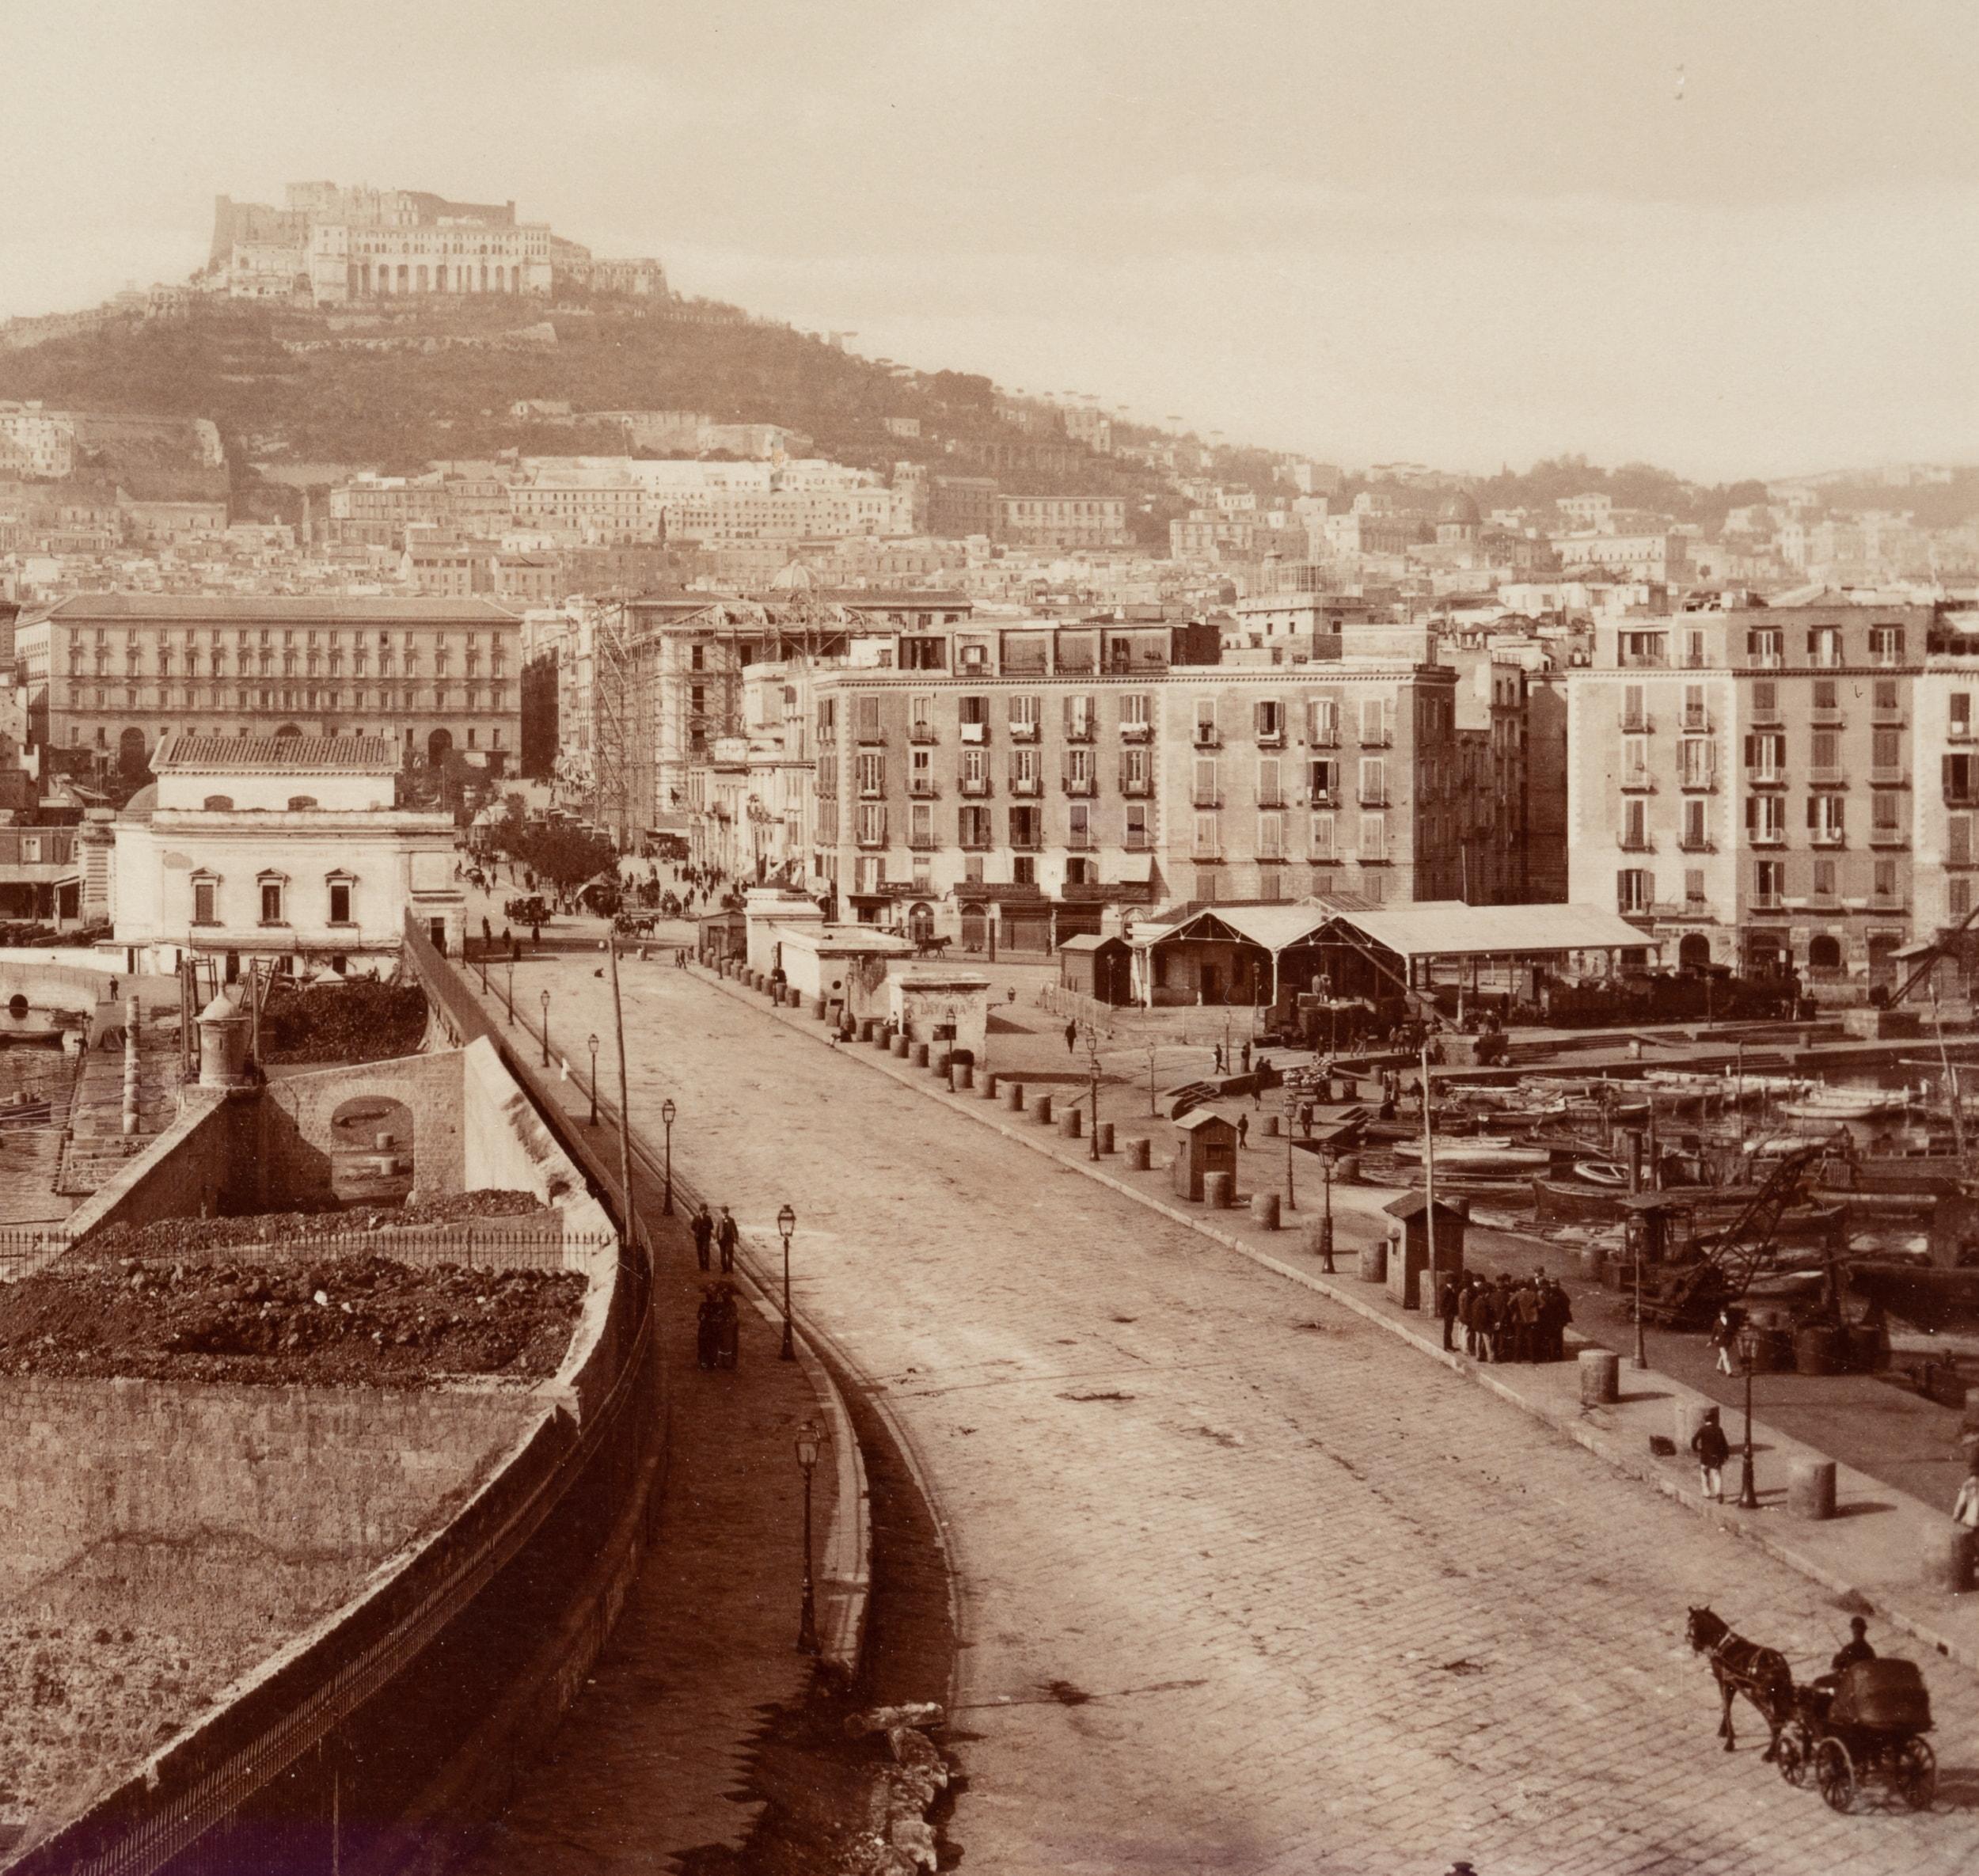 Fratelli Alinari (19th century): City view of Naples View from the harbour road, passing the Castel Nuovo on the left, up to the Vomero mountain and the Castel Sant' Elmo, c. 1880, albumen paper print

Technique: albumen paper print

Inscription: